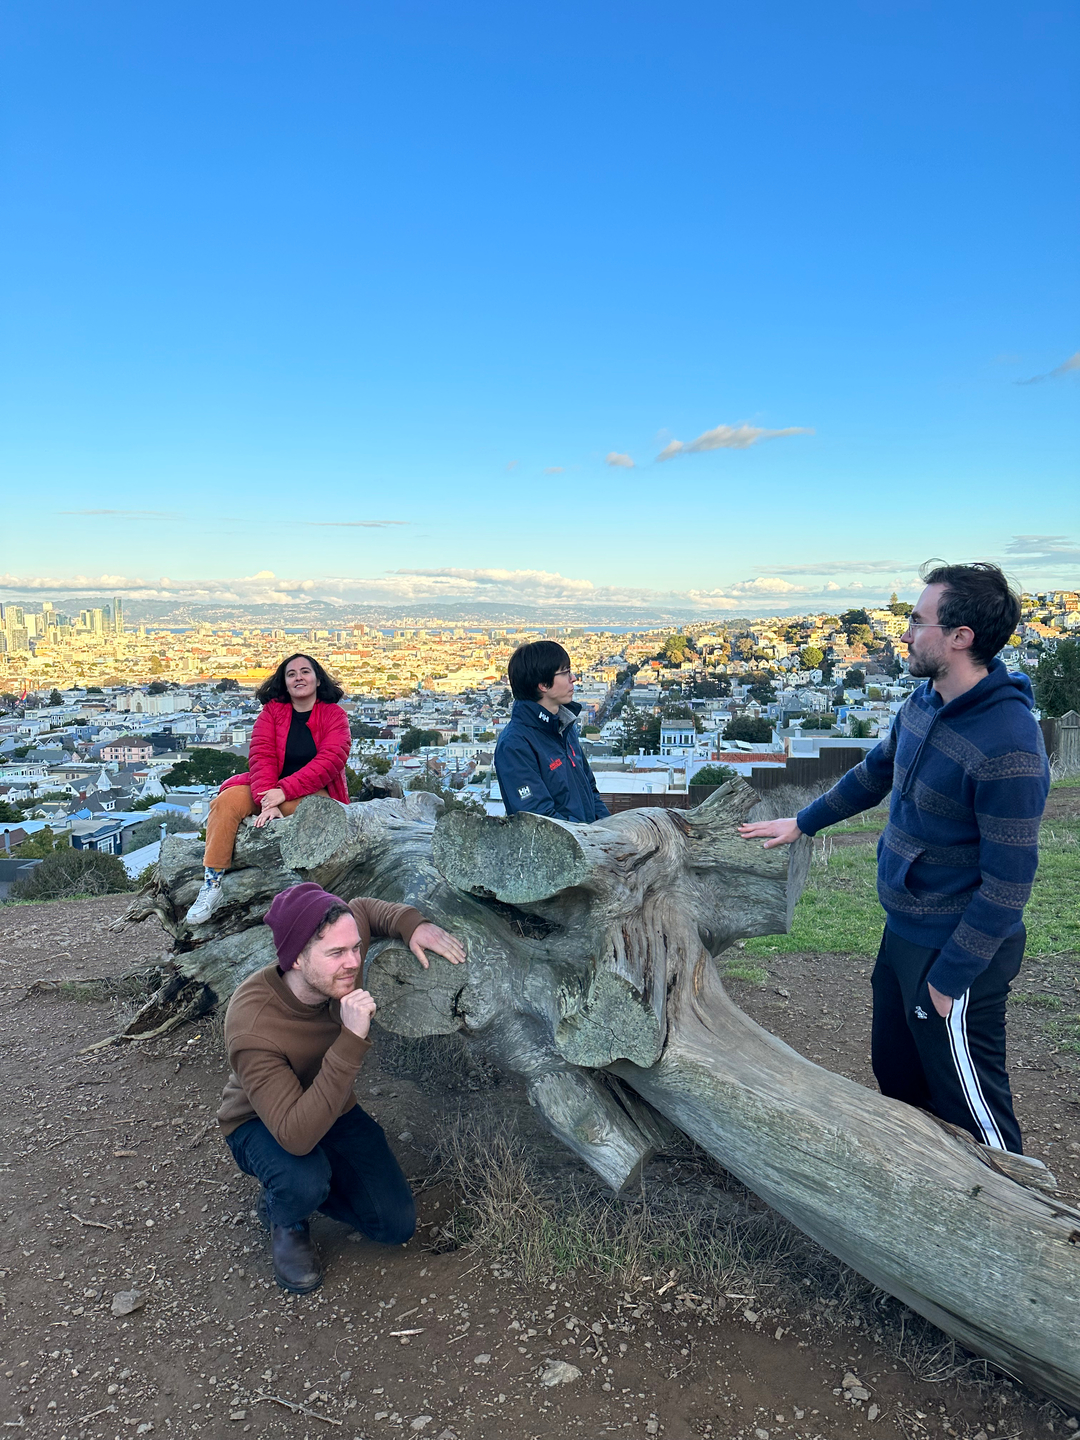 The Coverage Cat team prepares for their new 2022 album to drop while touching a log on Kite Hill.